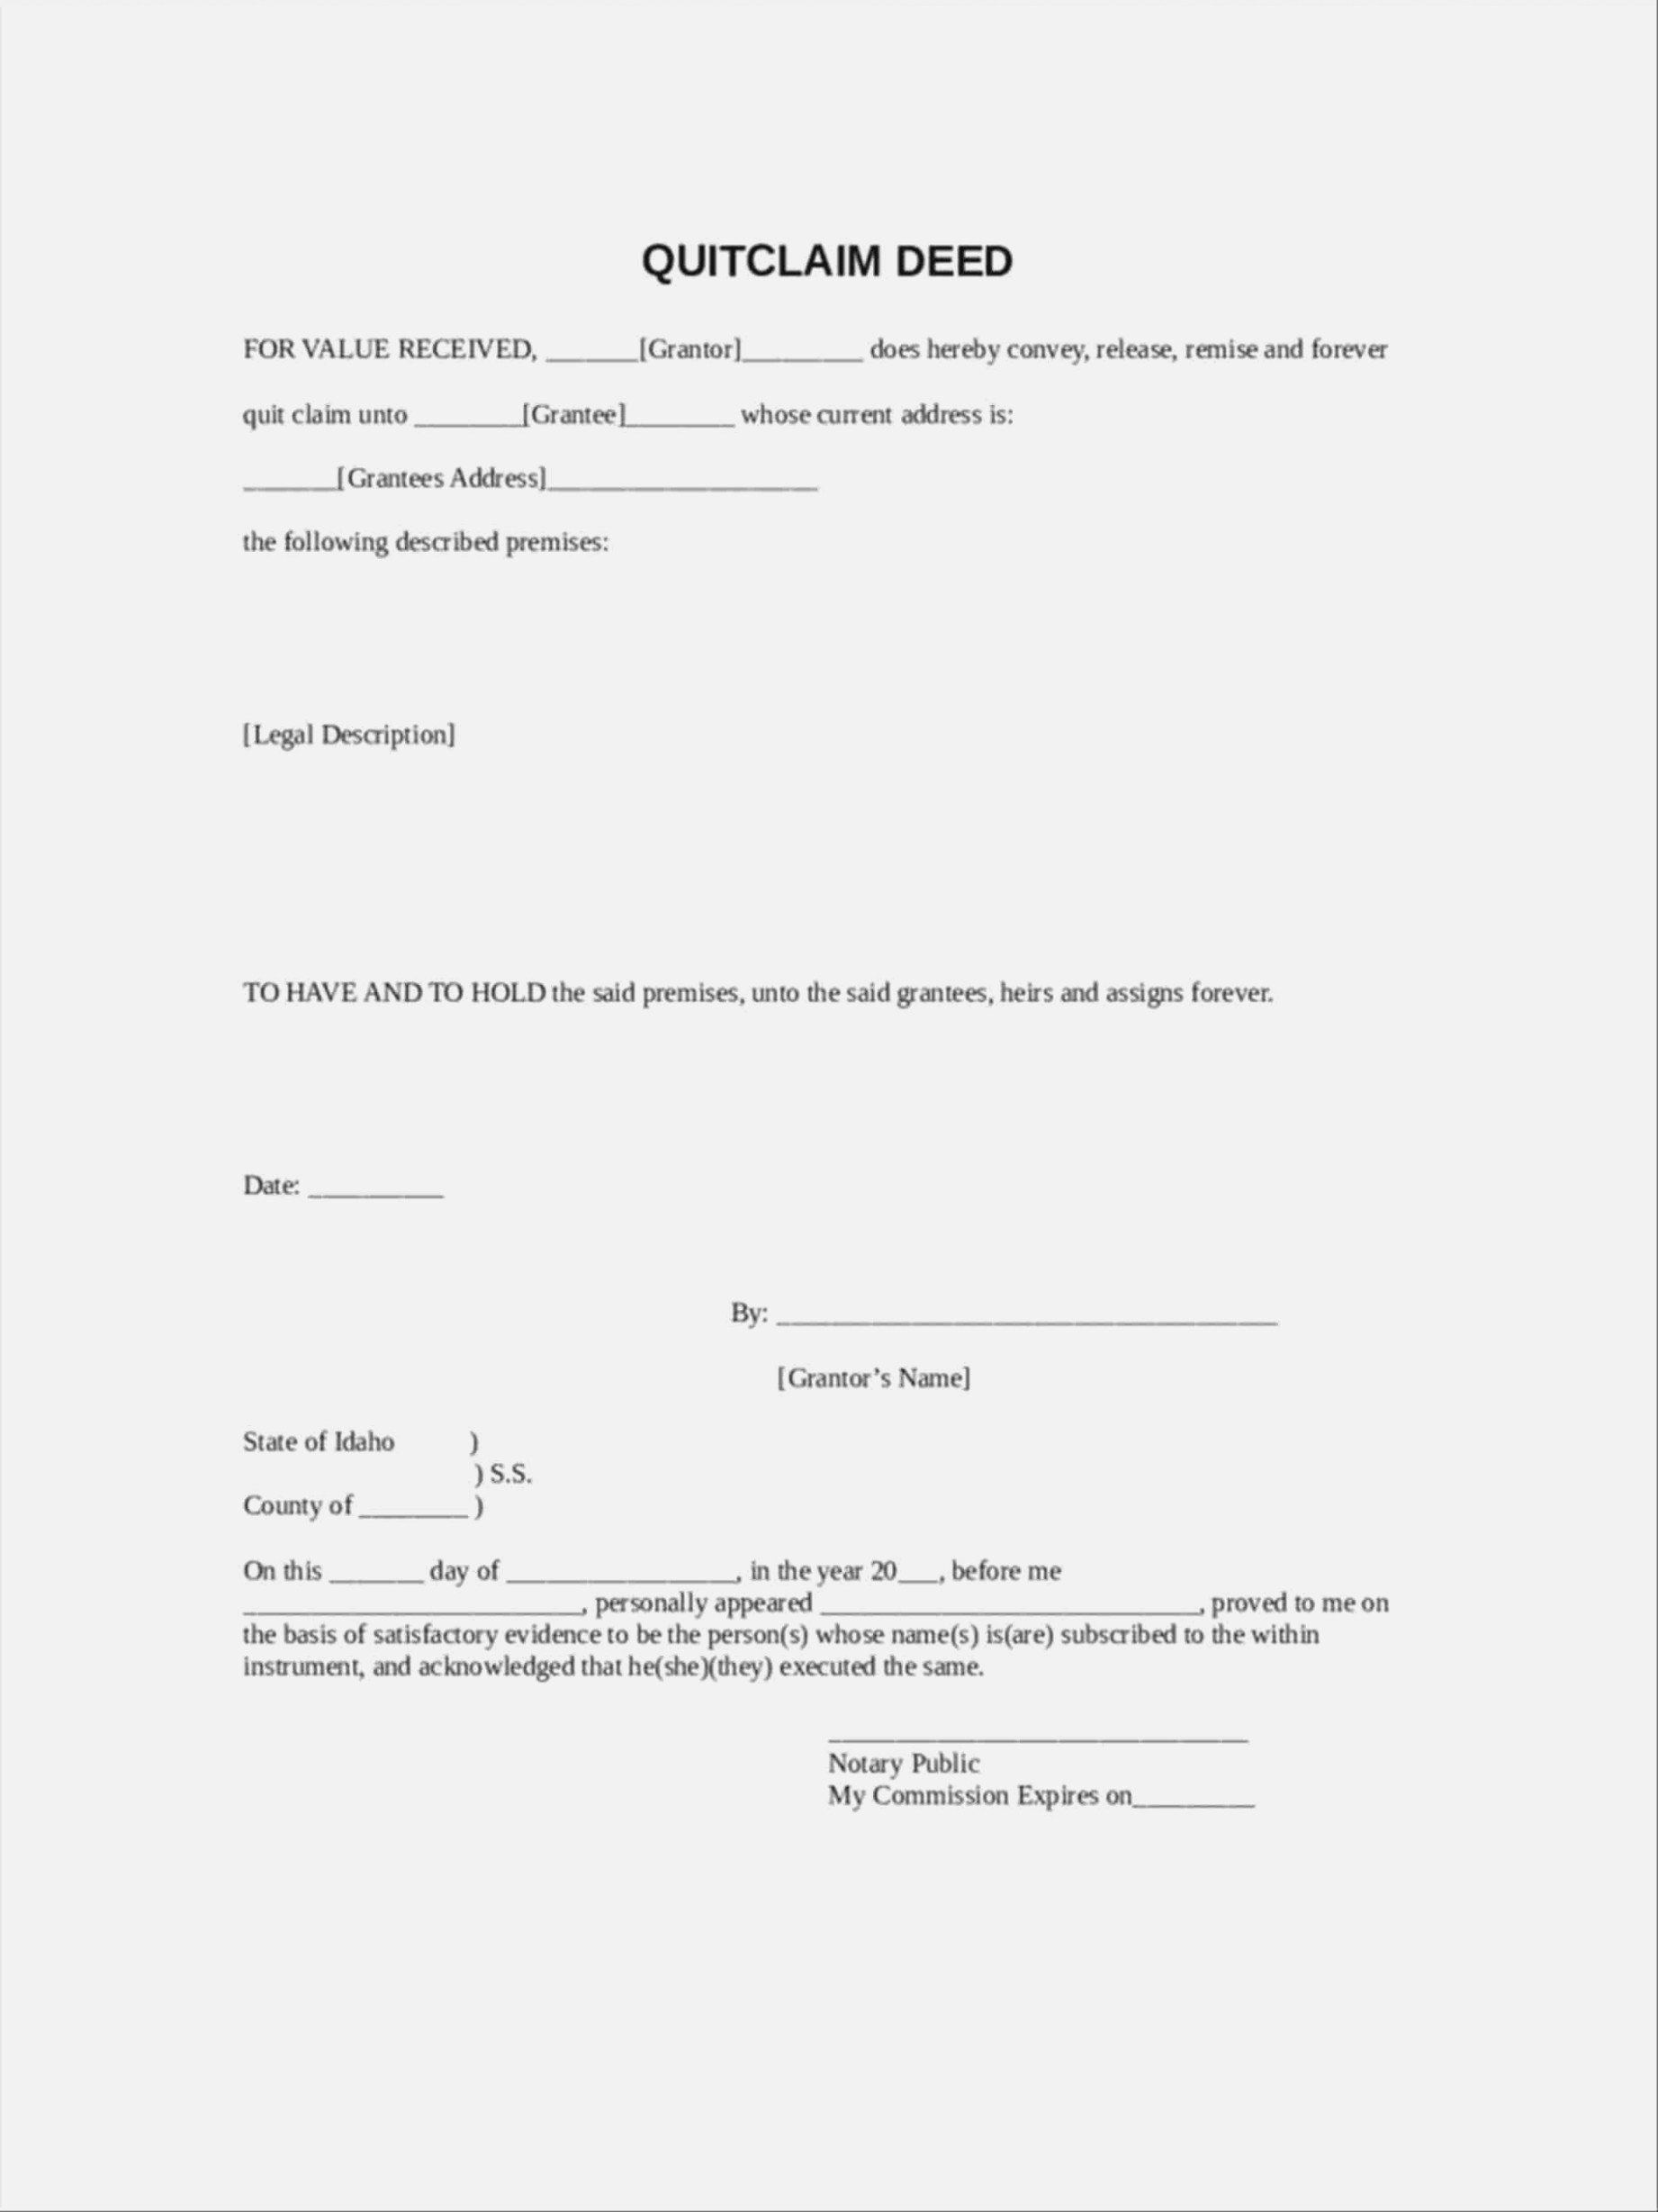 I Will Tell You The Truth | Realty Executives Mi : Invoice And - Free Printable Quit Claim Deed Form